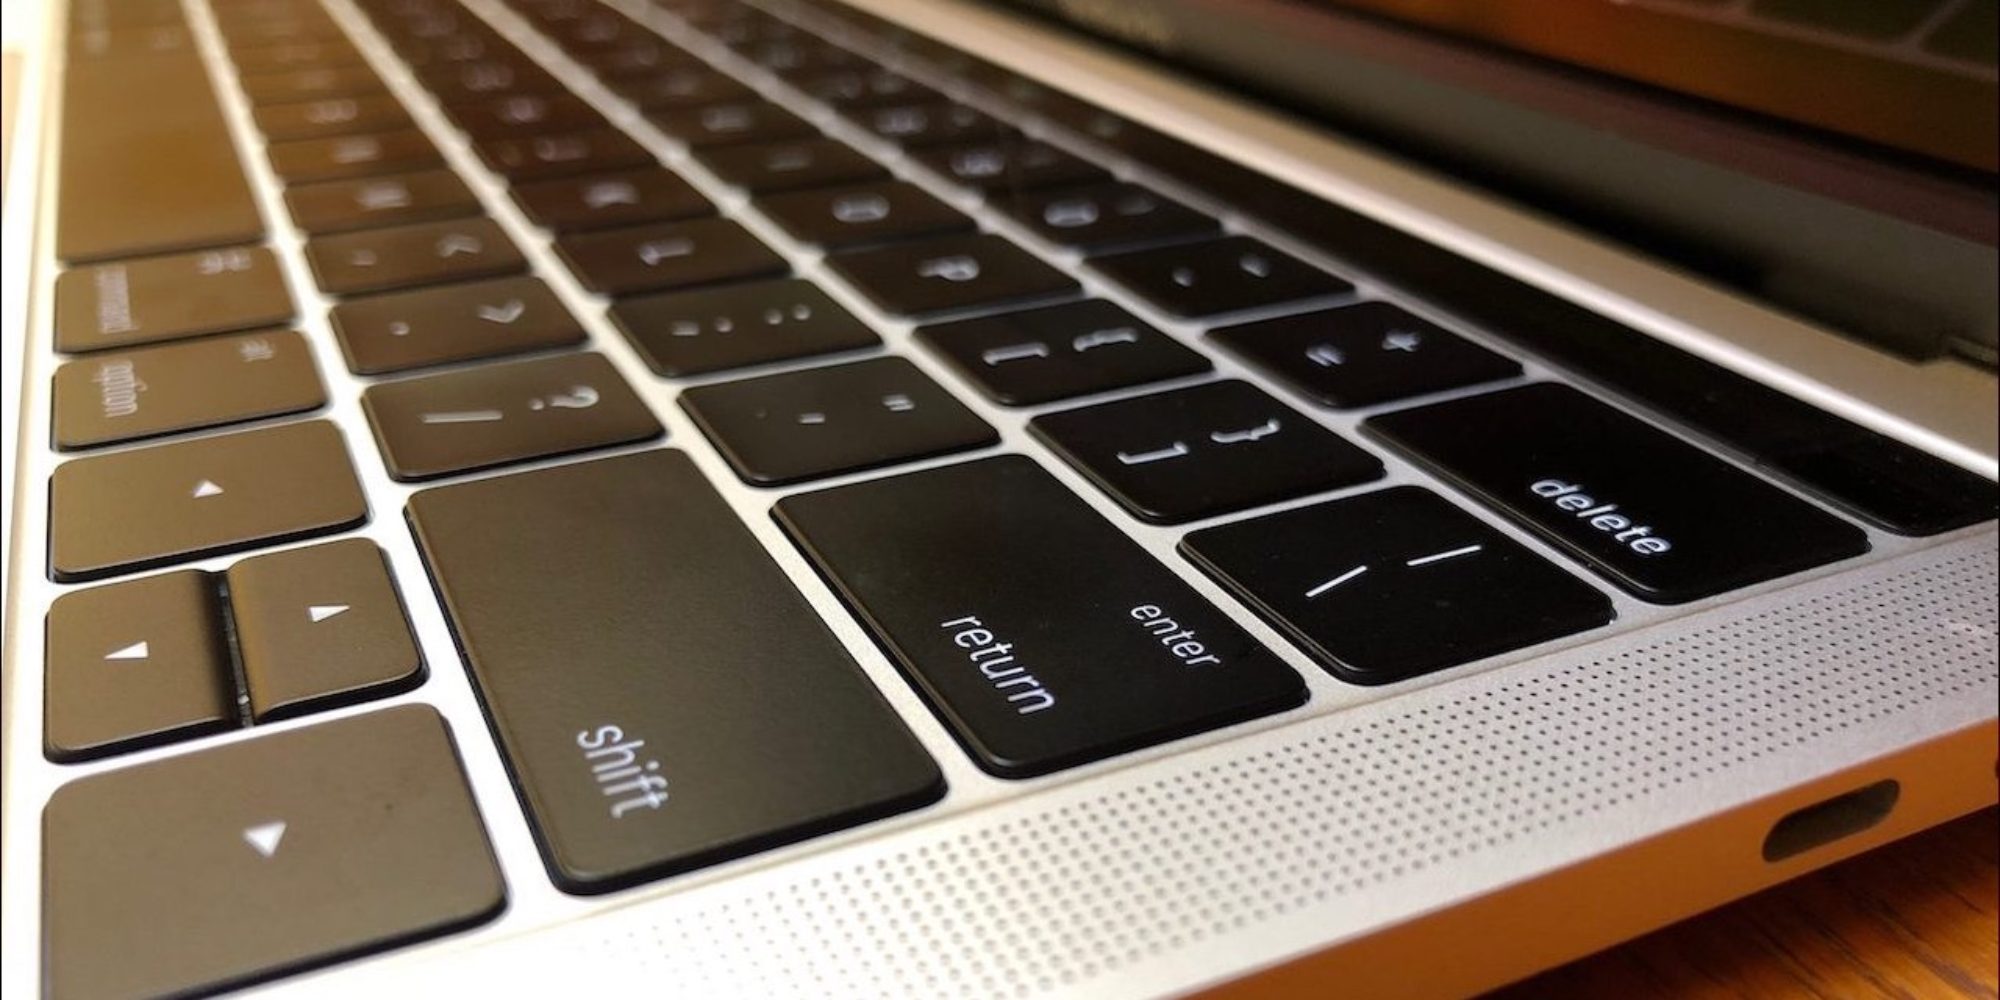 Have a Recent Apple Laptop? Here’s What You Need to Know about the Butterfly Keyboard